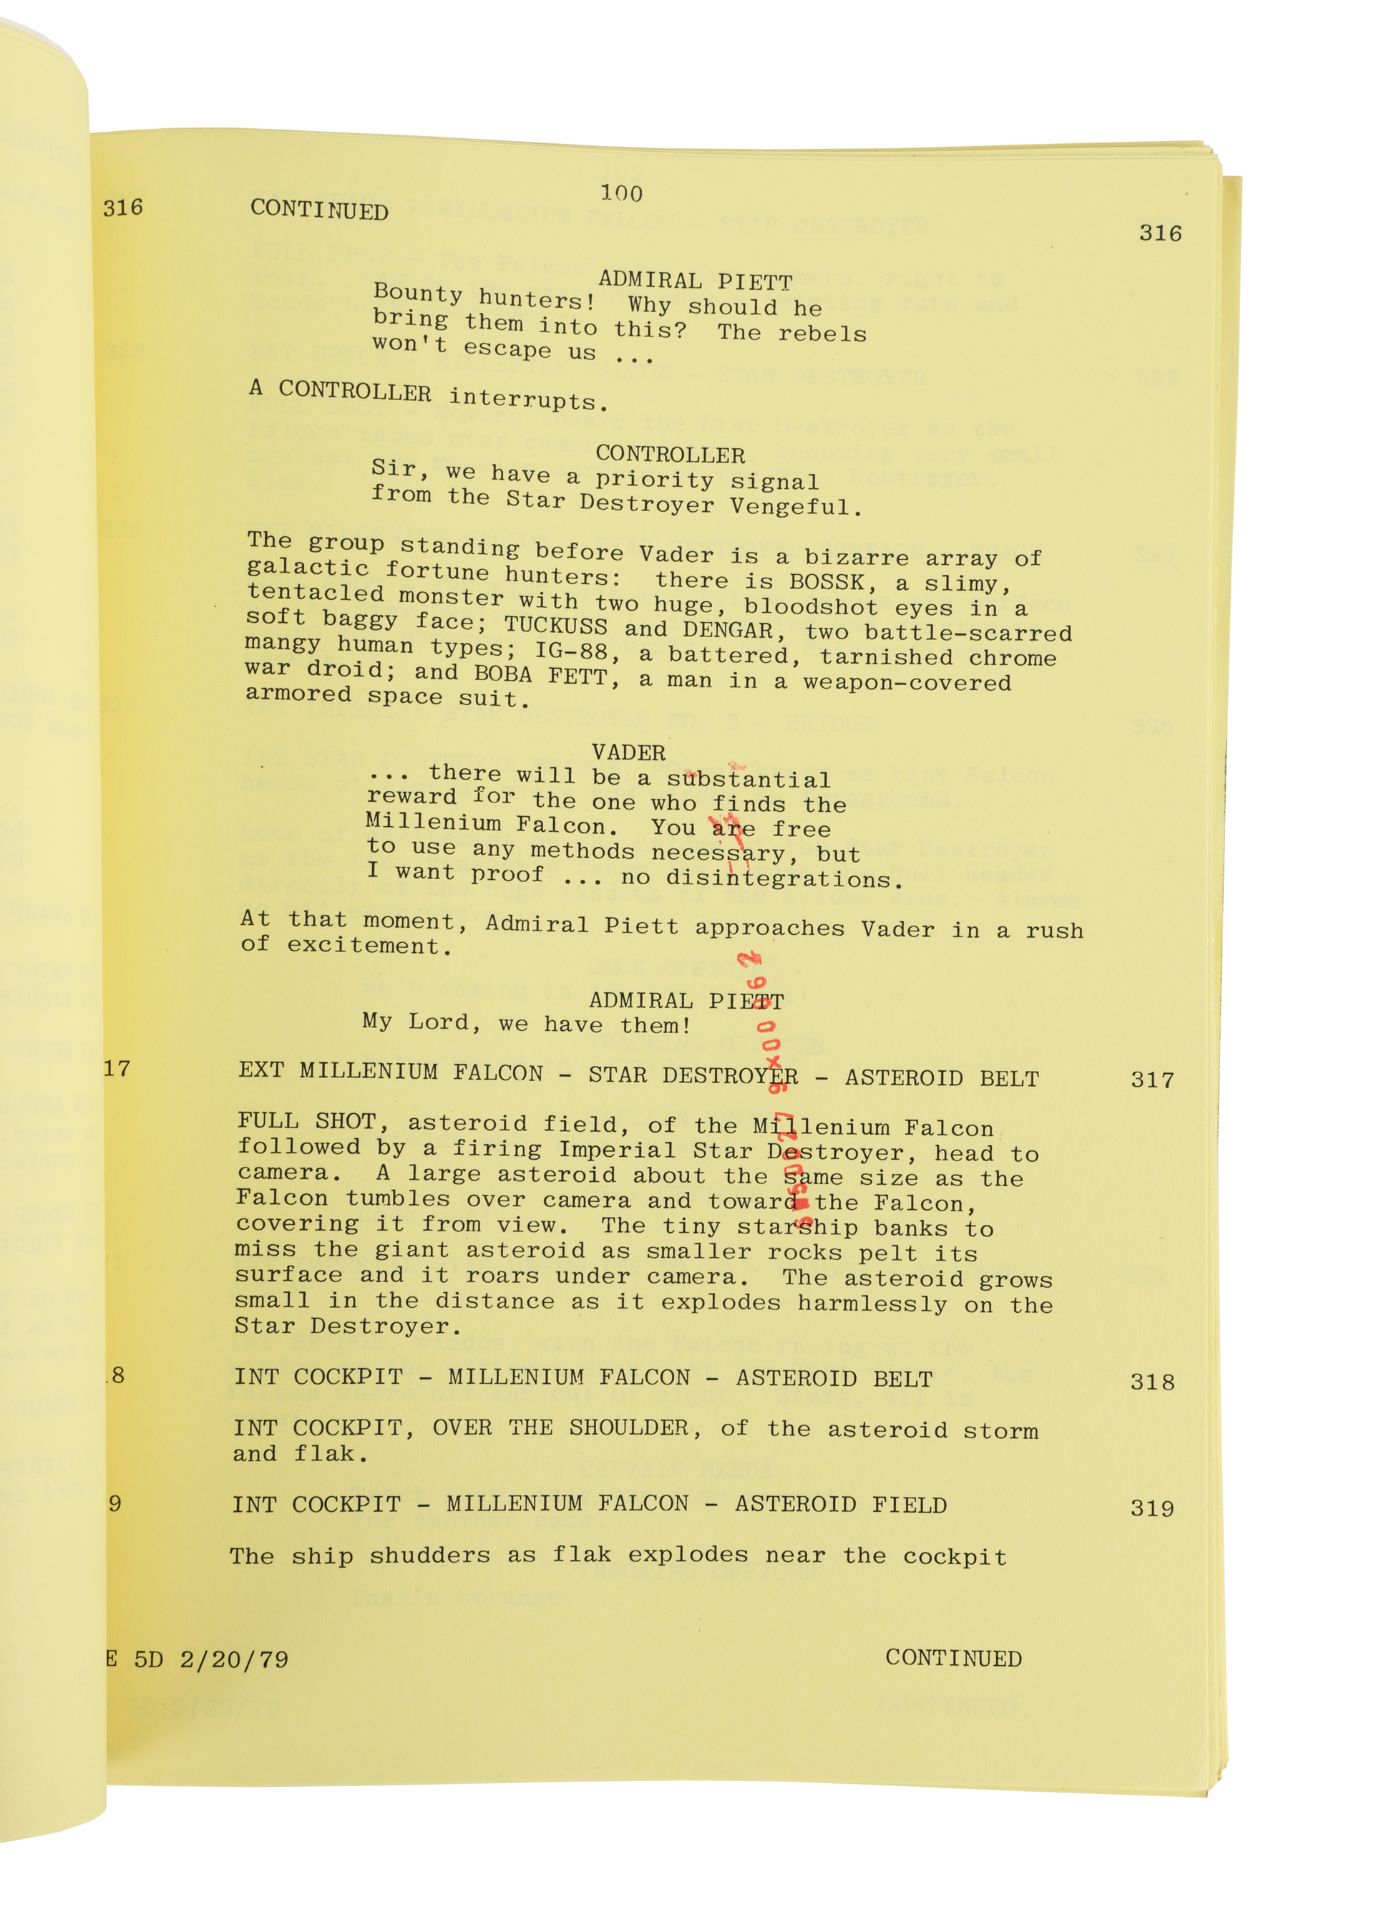 STAR WARS: THE EMPIRE STRIKES BACK (1980) - Anthony Daniels Collection: Hand-annotated Partial Scrip - Image 7 of 12